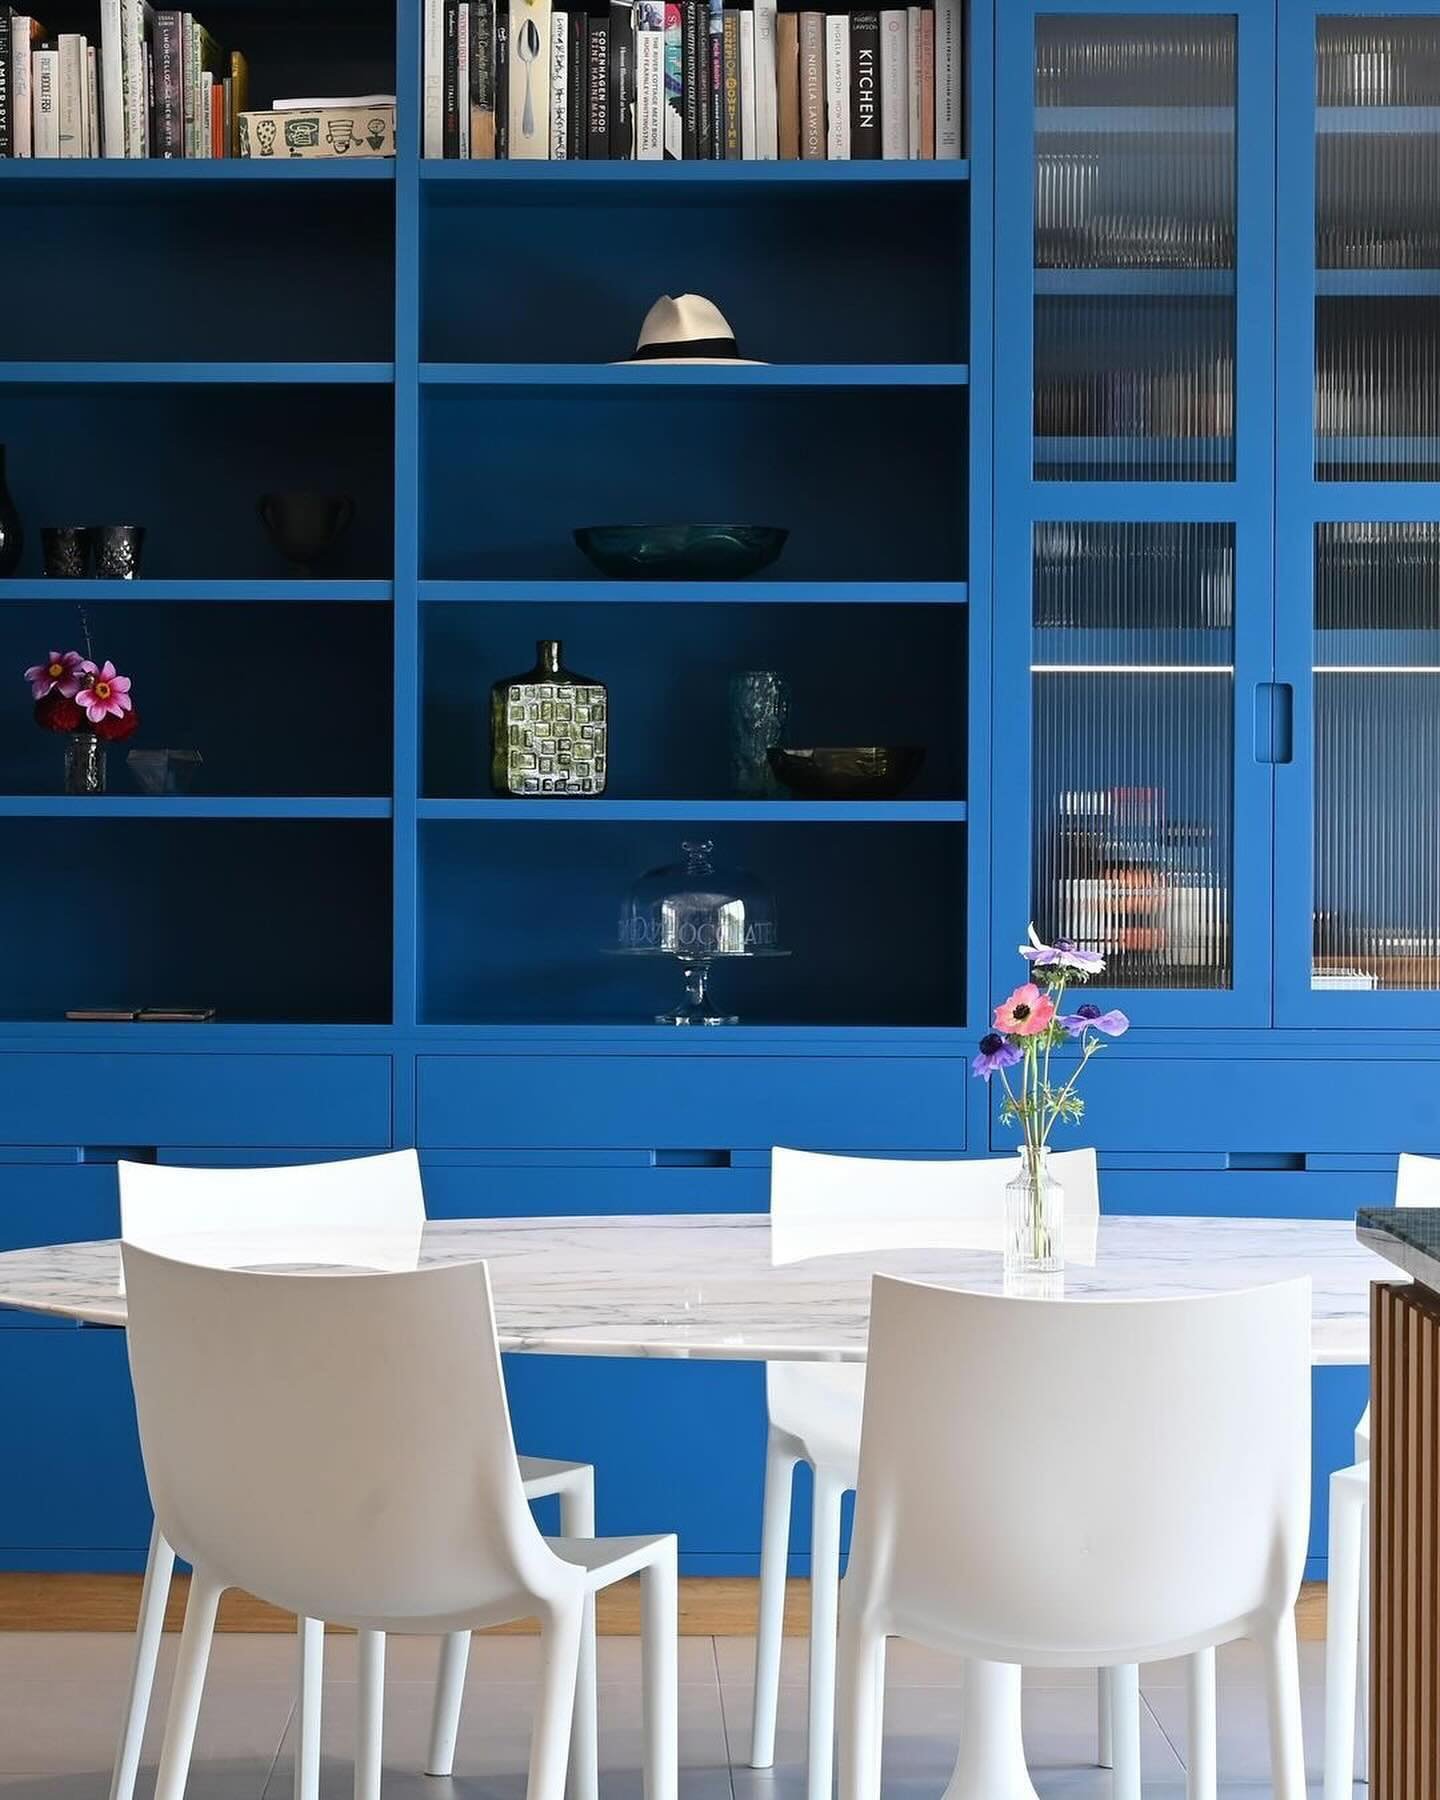 Nothing quite gives that Friday feeling like this vibrant blue kitchen! 💙

If you&rsquo;re considering going bold with your cabinets, 🔖 save this post to give you ideas for the rest of the space and what to pair with a striking colour. 

Here you&r